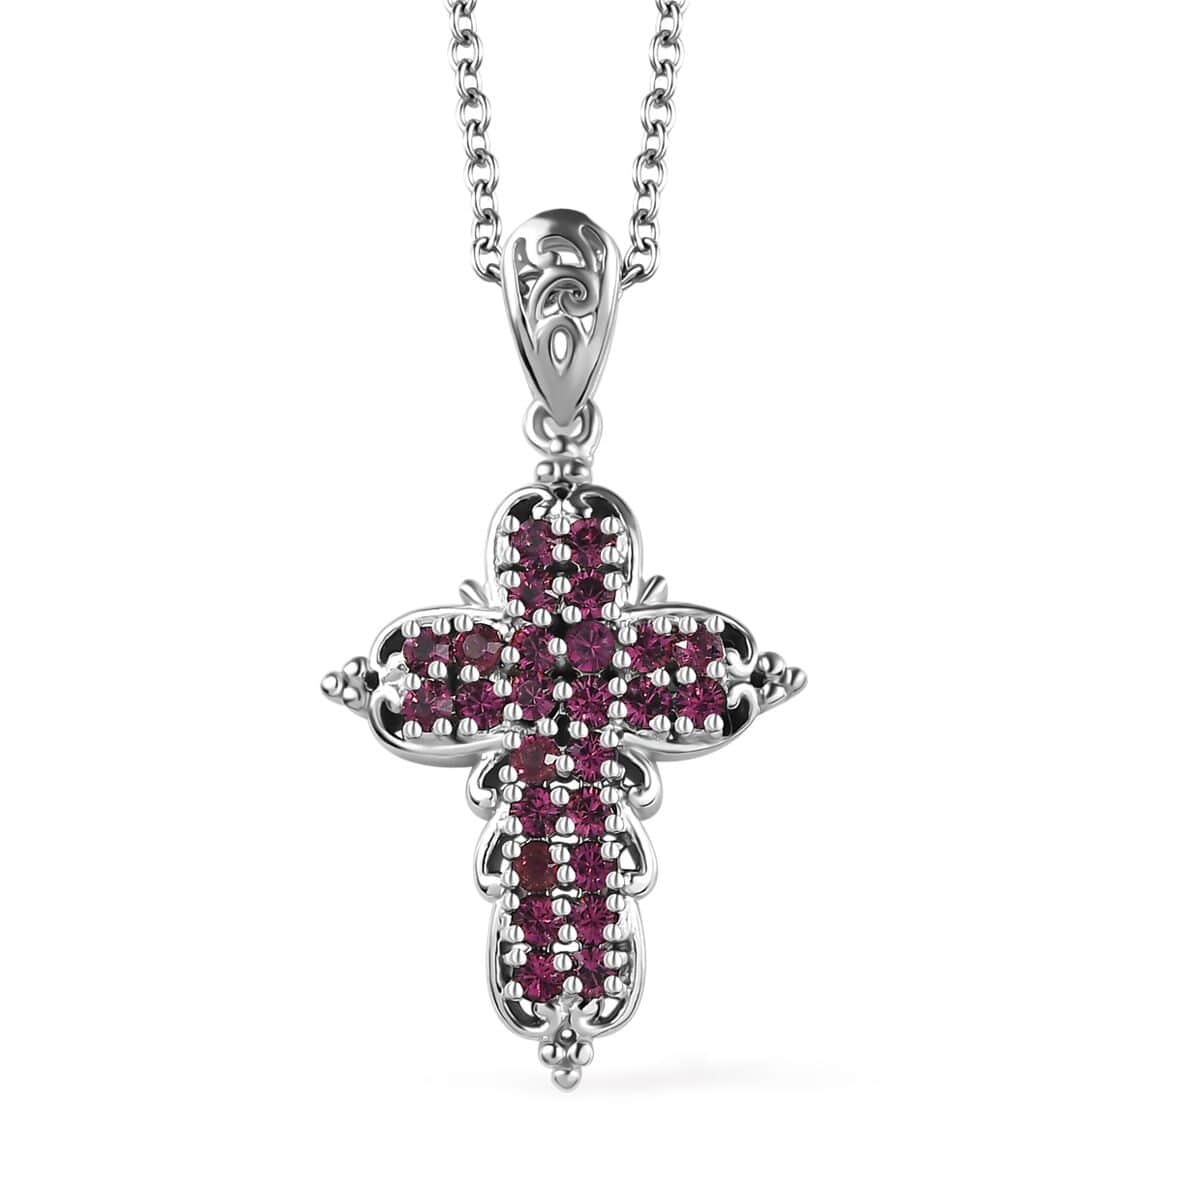 Designer Premium Foilback Amethyst Color Austrian Crystal Cross Pendant in Platinum Over Copper with Stainless Steel Necklace 20 Inches image number 0